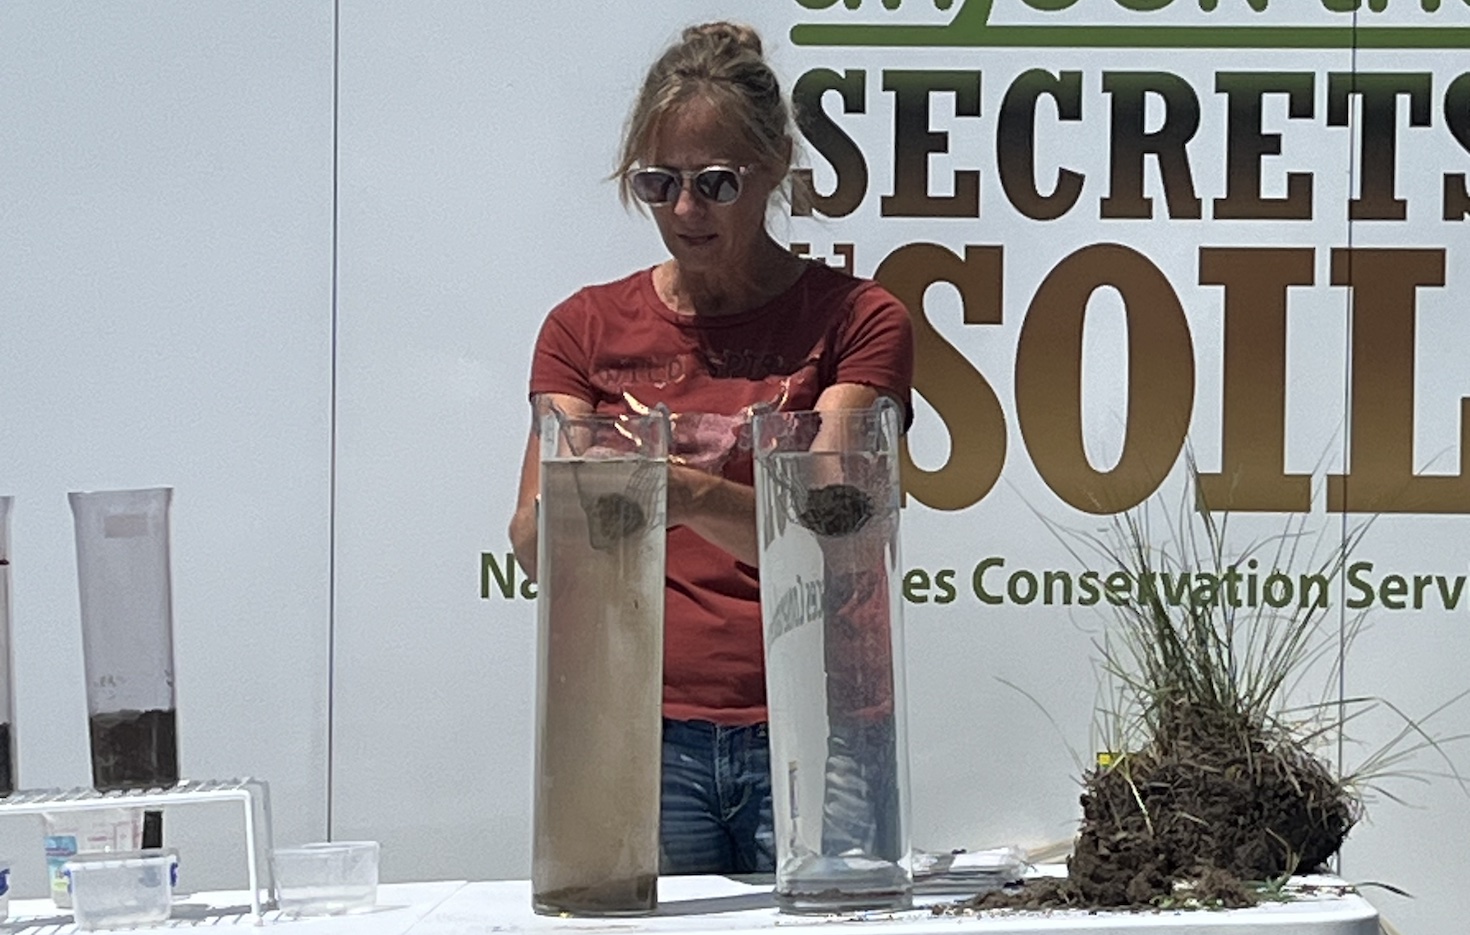 A person shows off a soil experiment